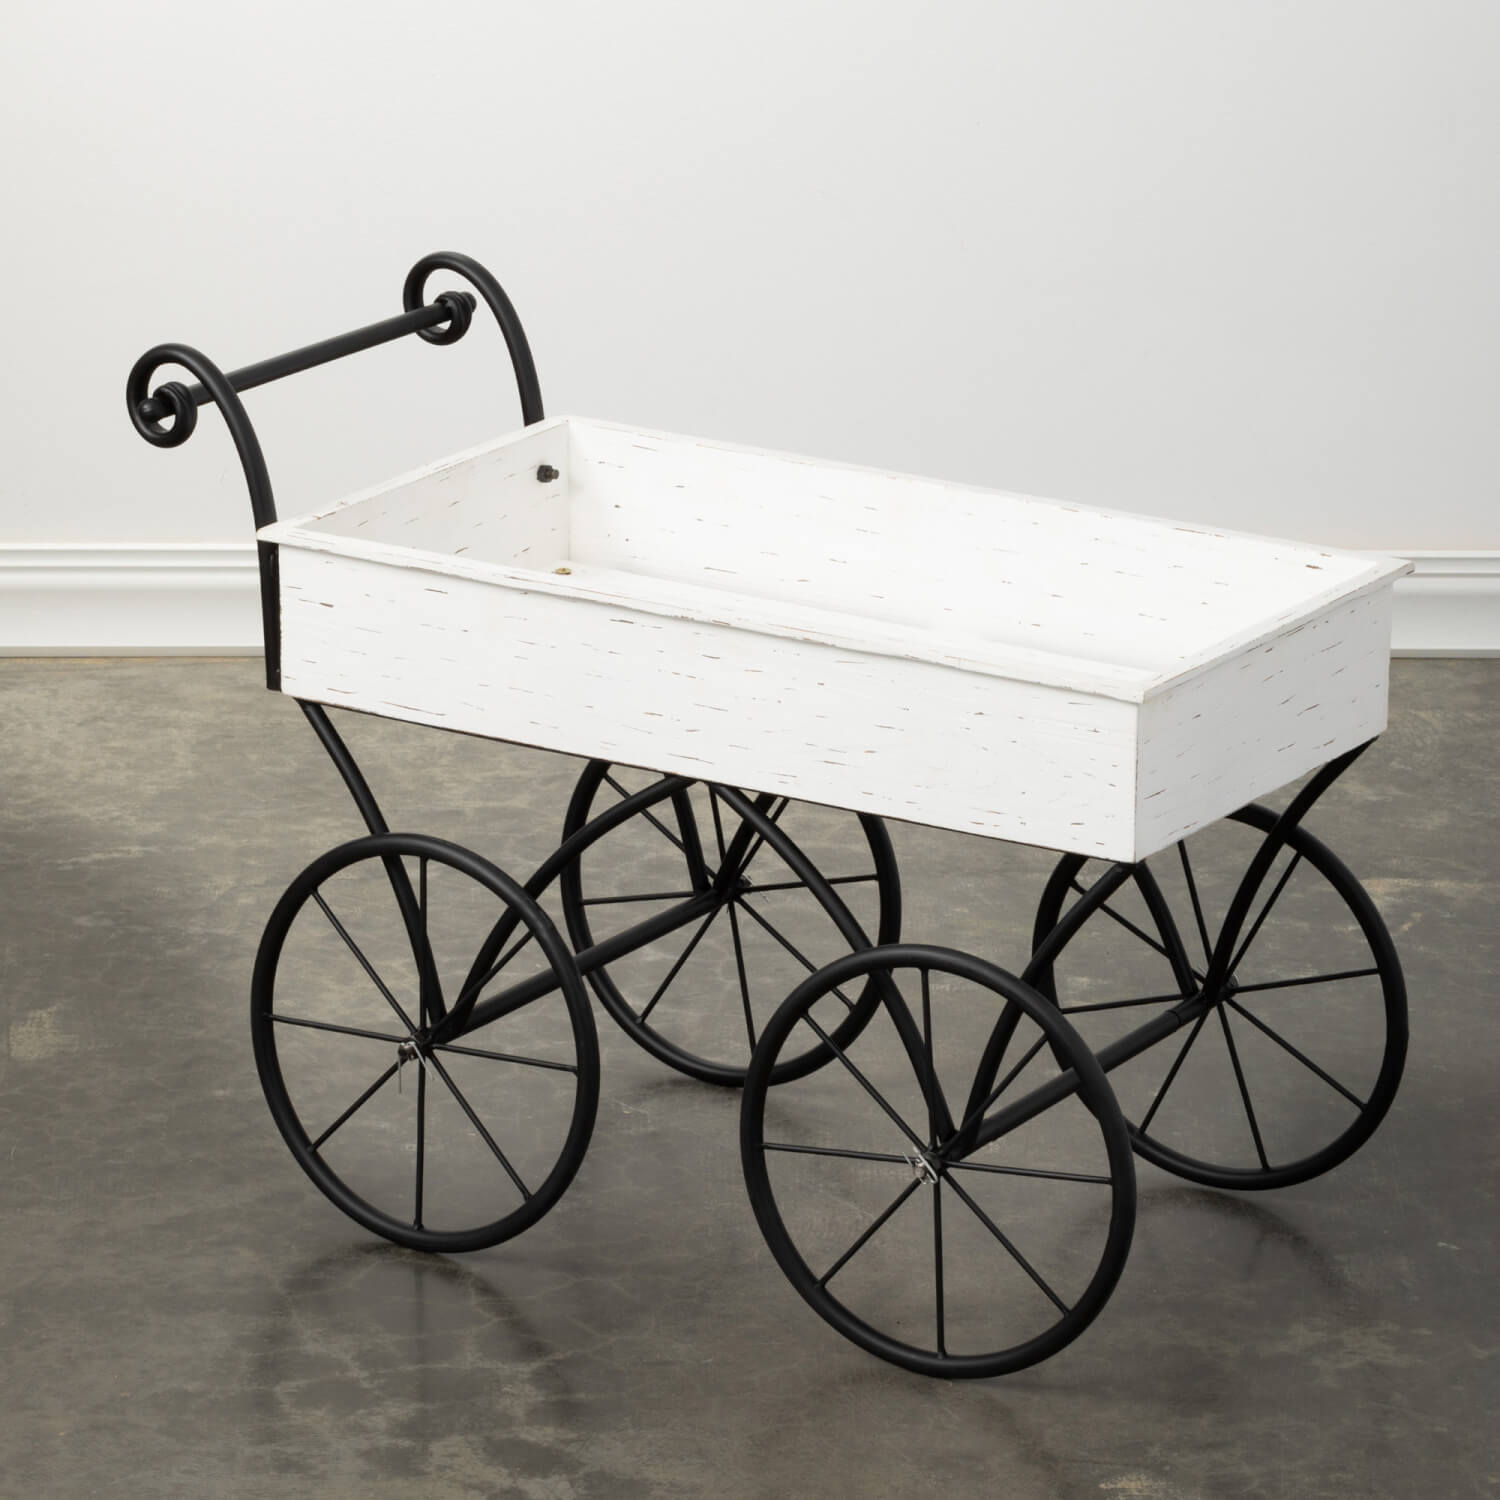 large-french-country-flower-cart-home-decor-sullivan-Threadbare Gypsy Soul